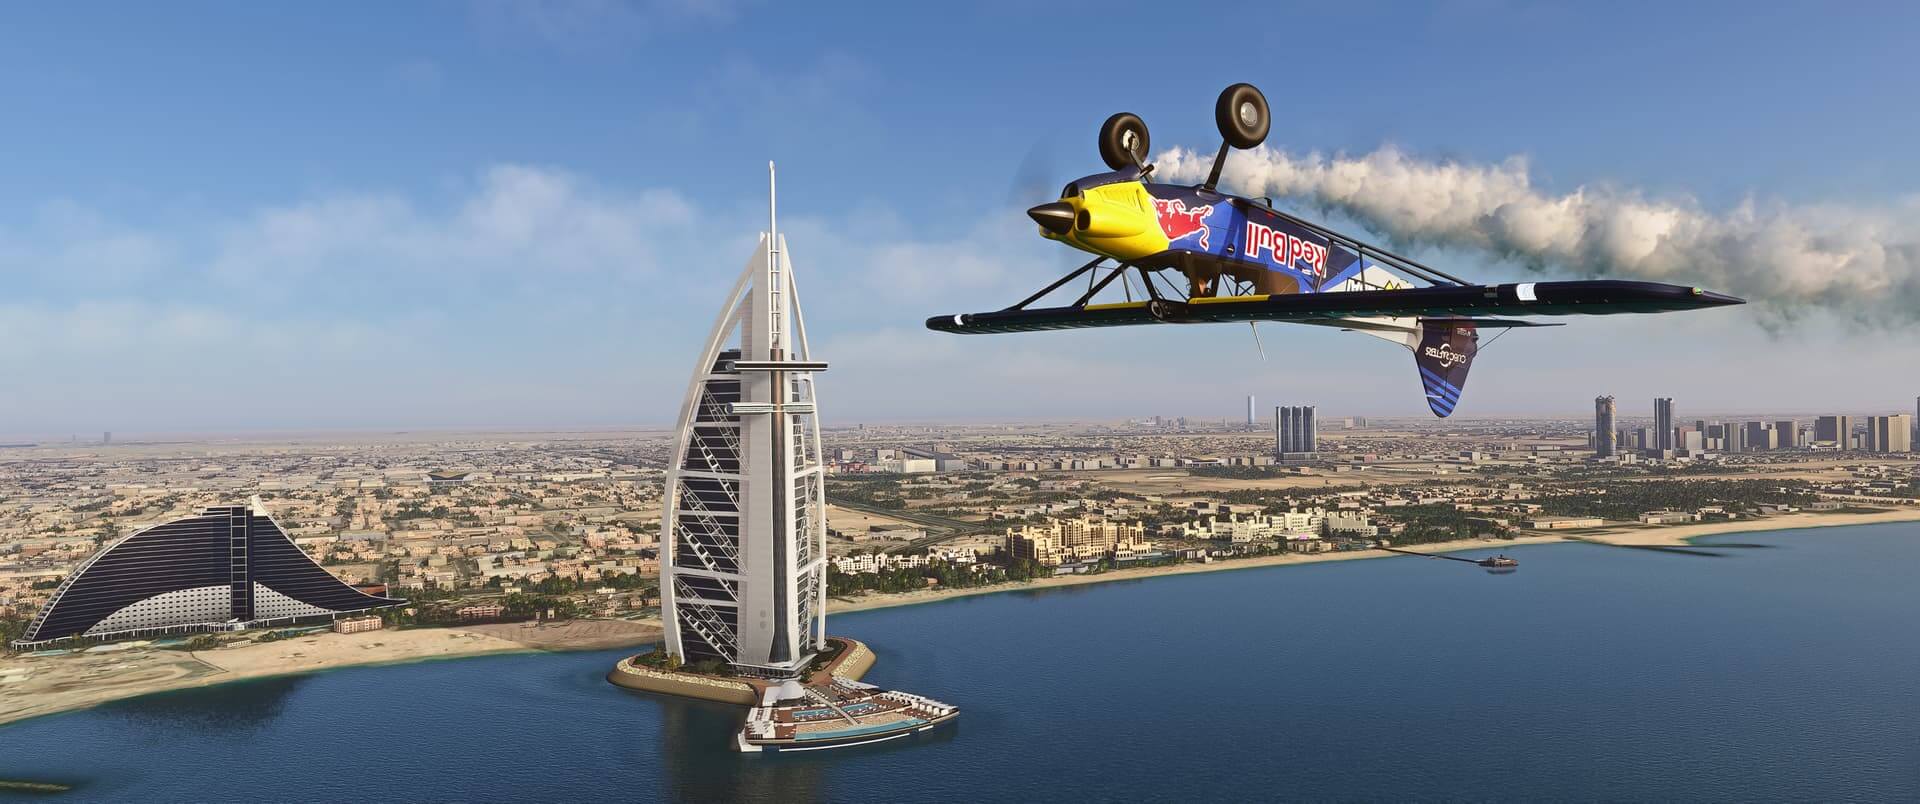 The Red Bull Carbon Cub flies inverted with white smoke trailing behind, whilst passing the Burj Al Arab Resort Helipad.